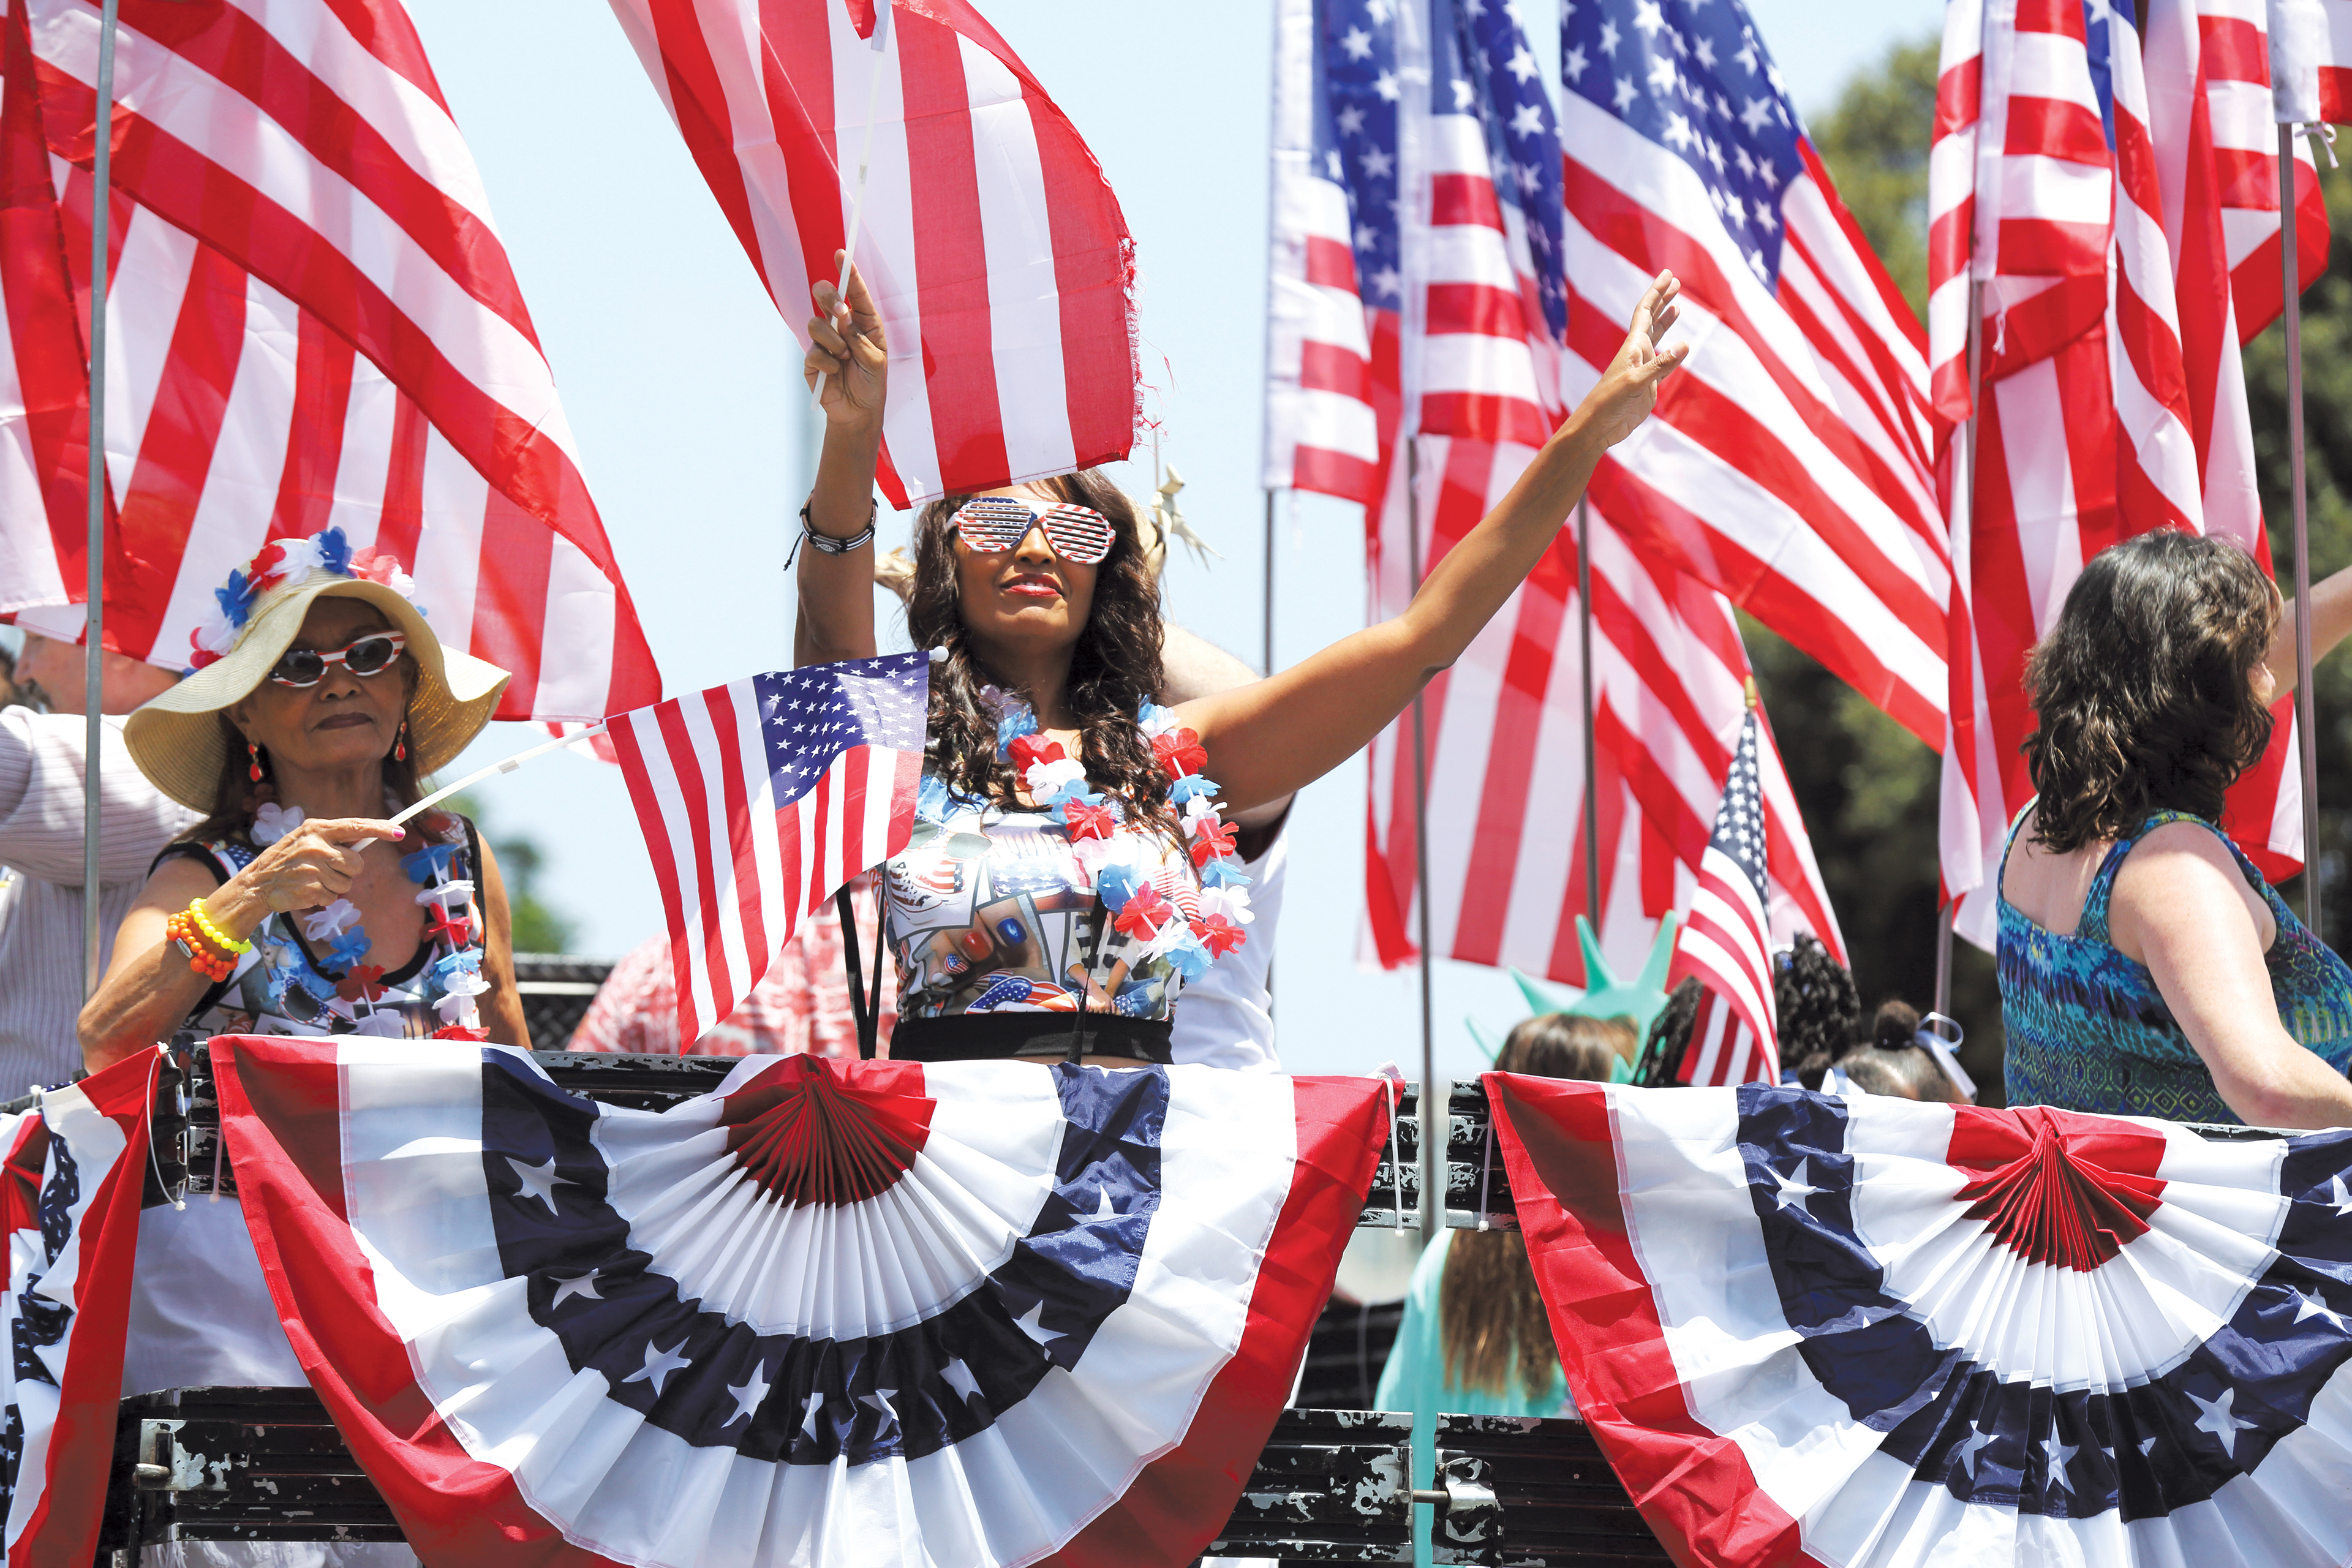 Community invited to celebrate at 17th Annual Fourth of July Parade